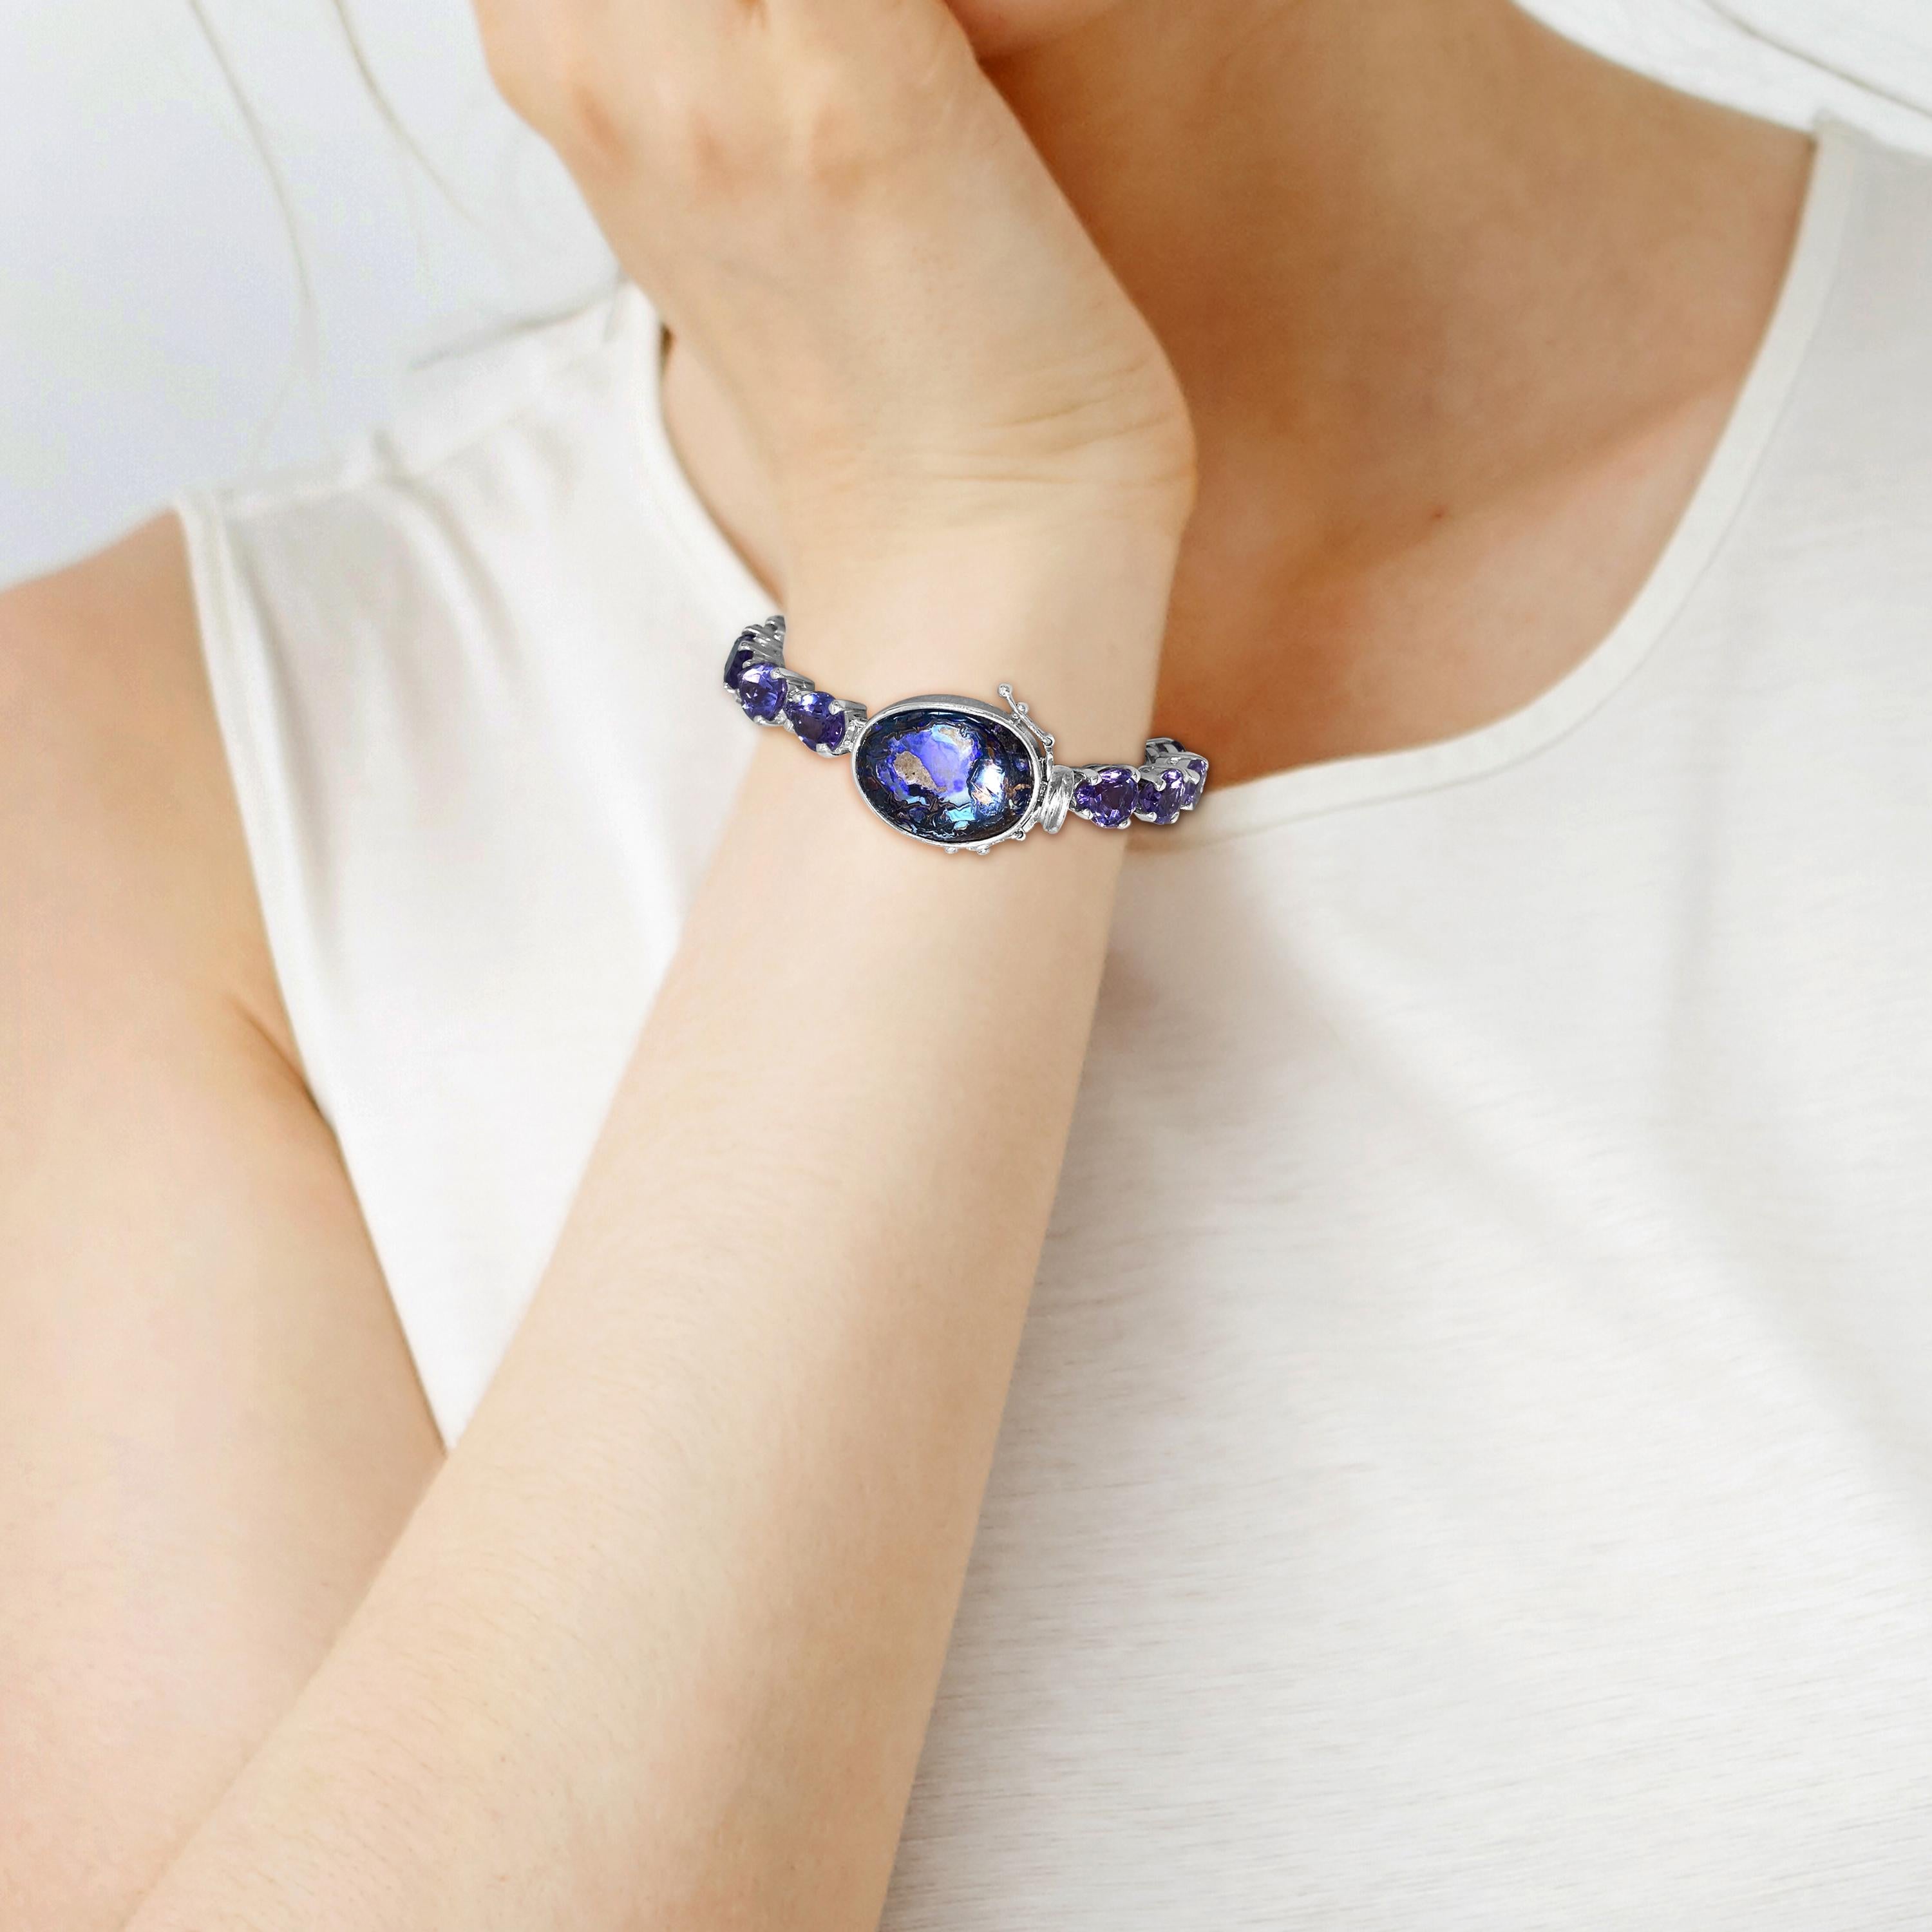 Cloak your wrist in this Artisan One of a Kind Shimmering Opal Closure Amethyst Accent Tennis Bracelet in Sterling Silver with Decorative Clasps

Bracelet Length: 7.25 in